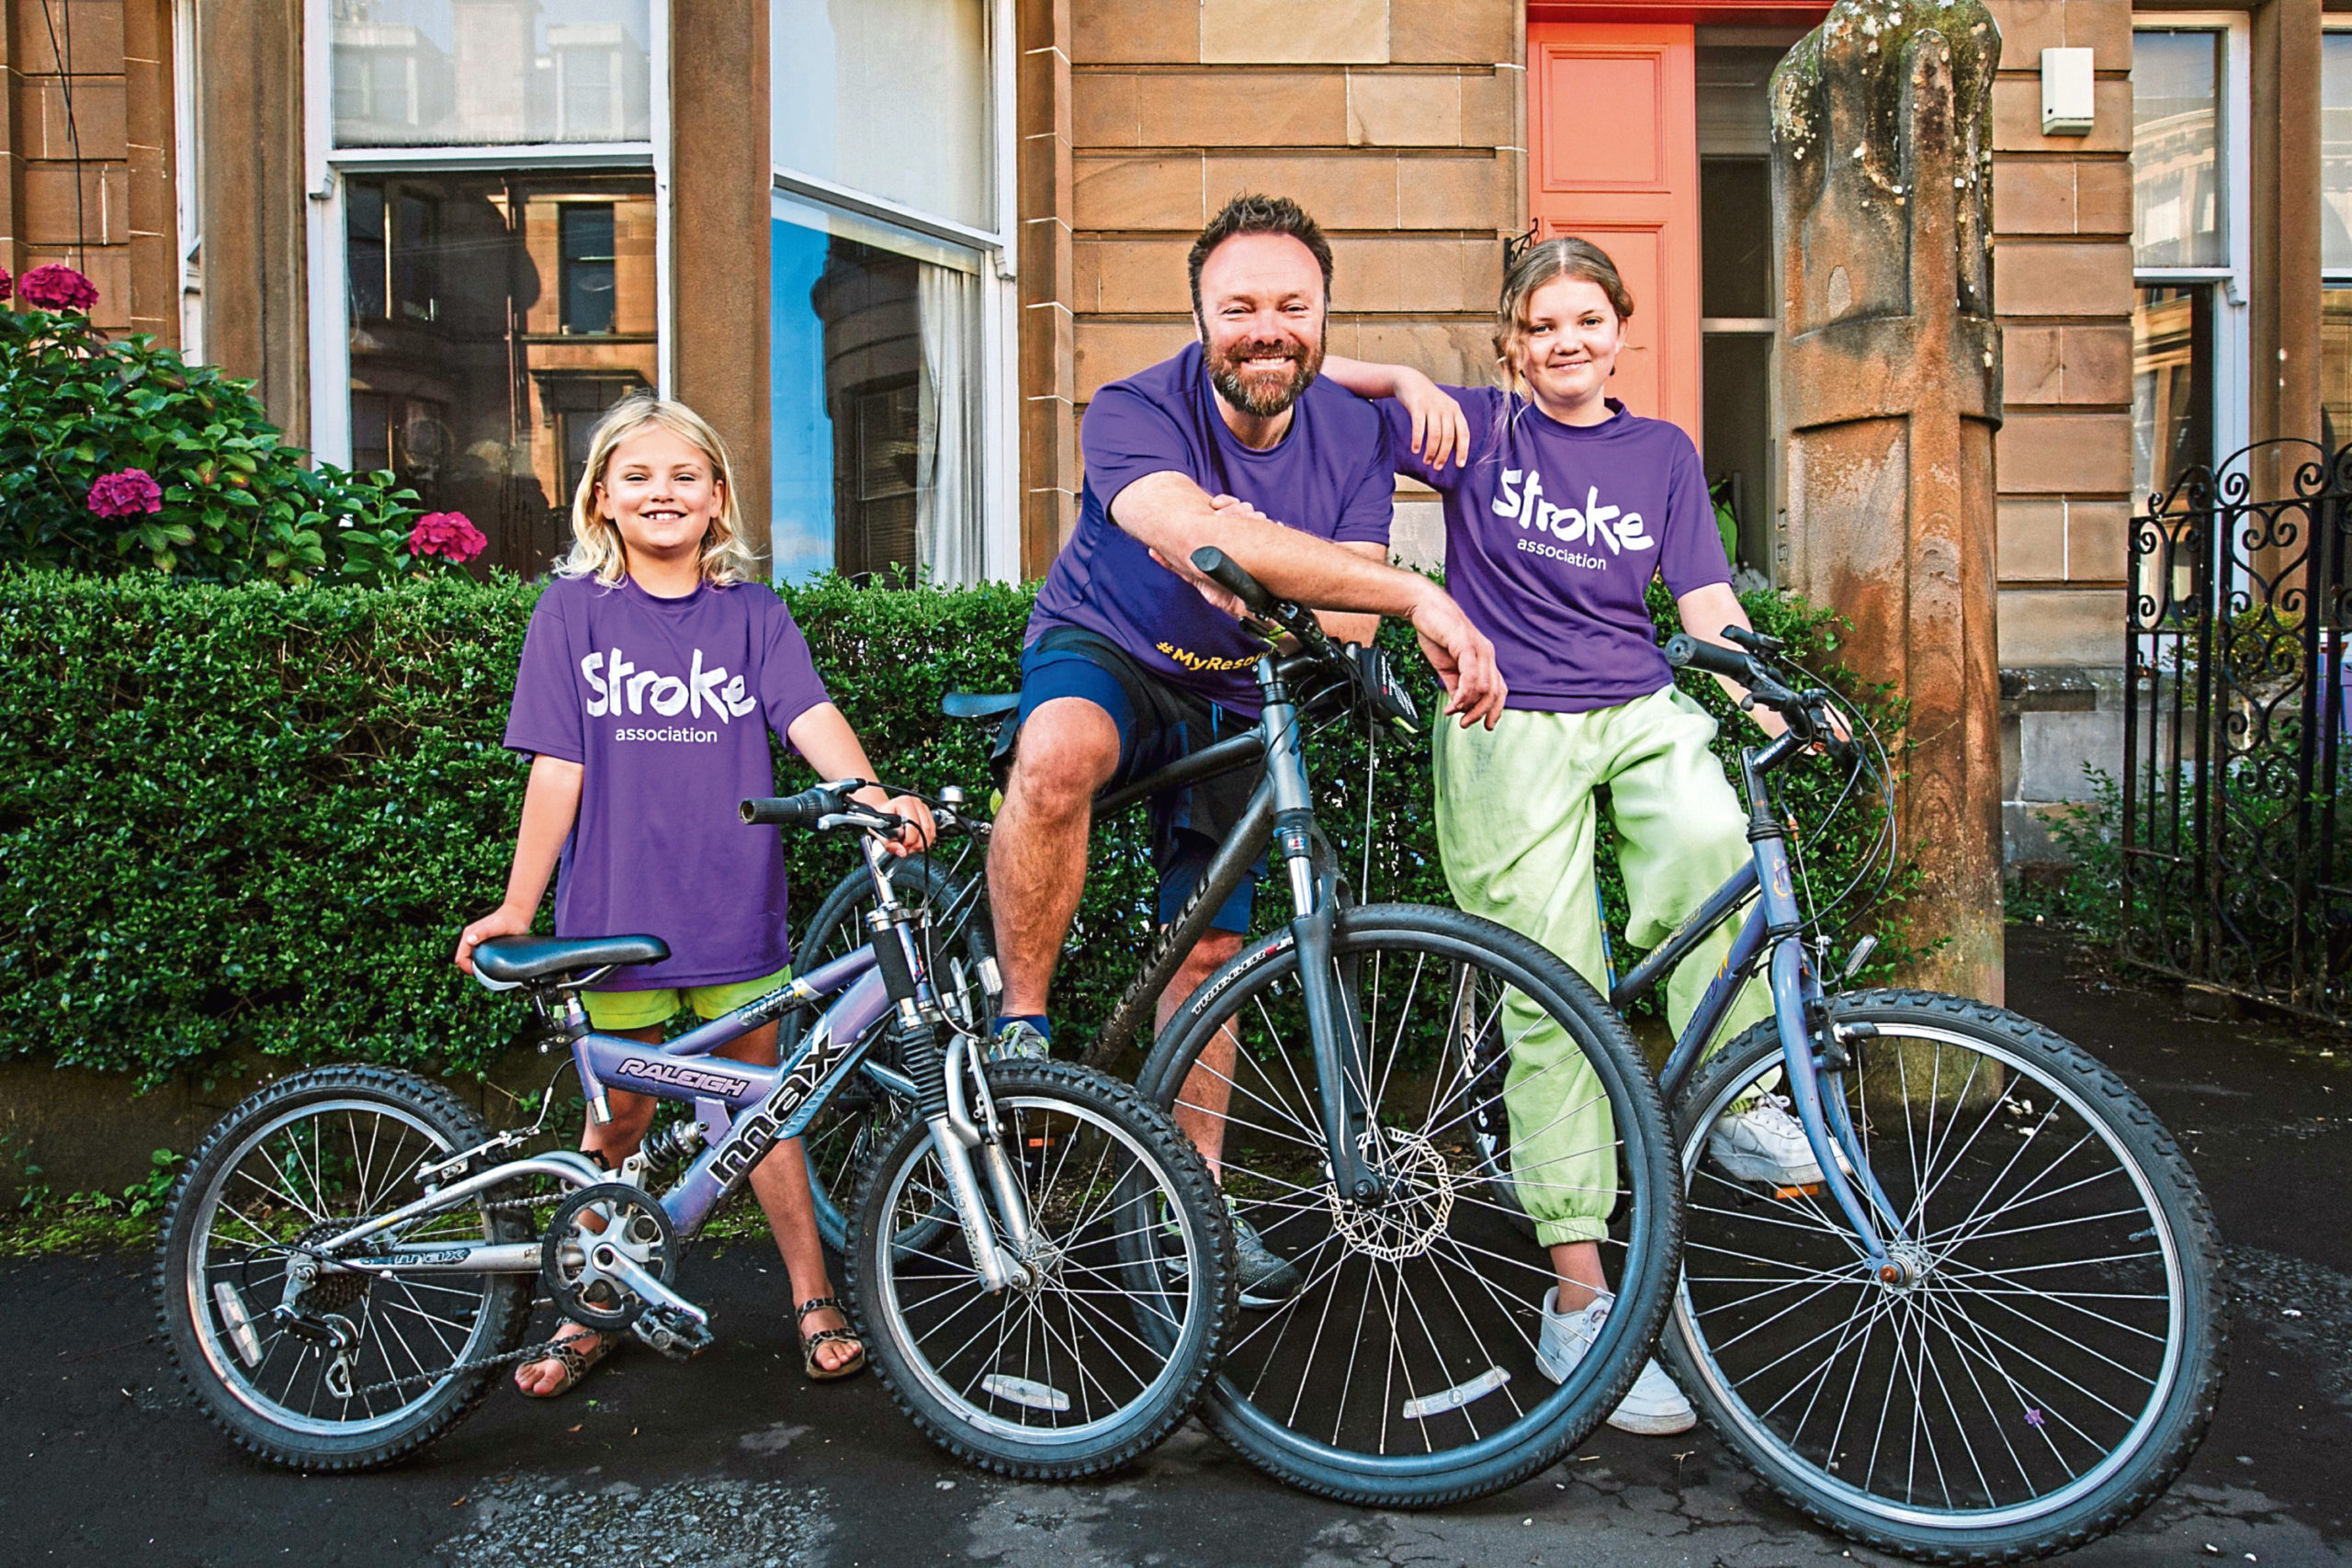 Stephen and daughters Elsa and Thea who are cycling to raise funds for the Stroke Association